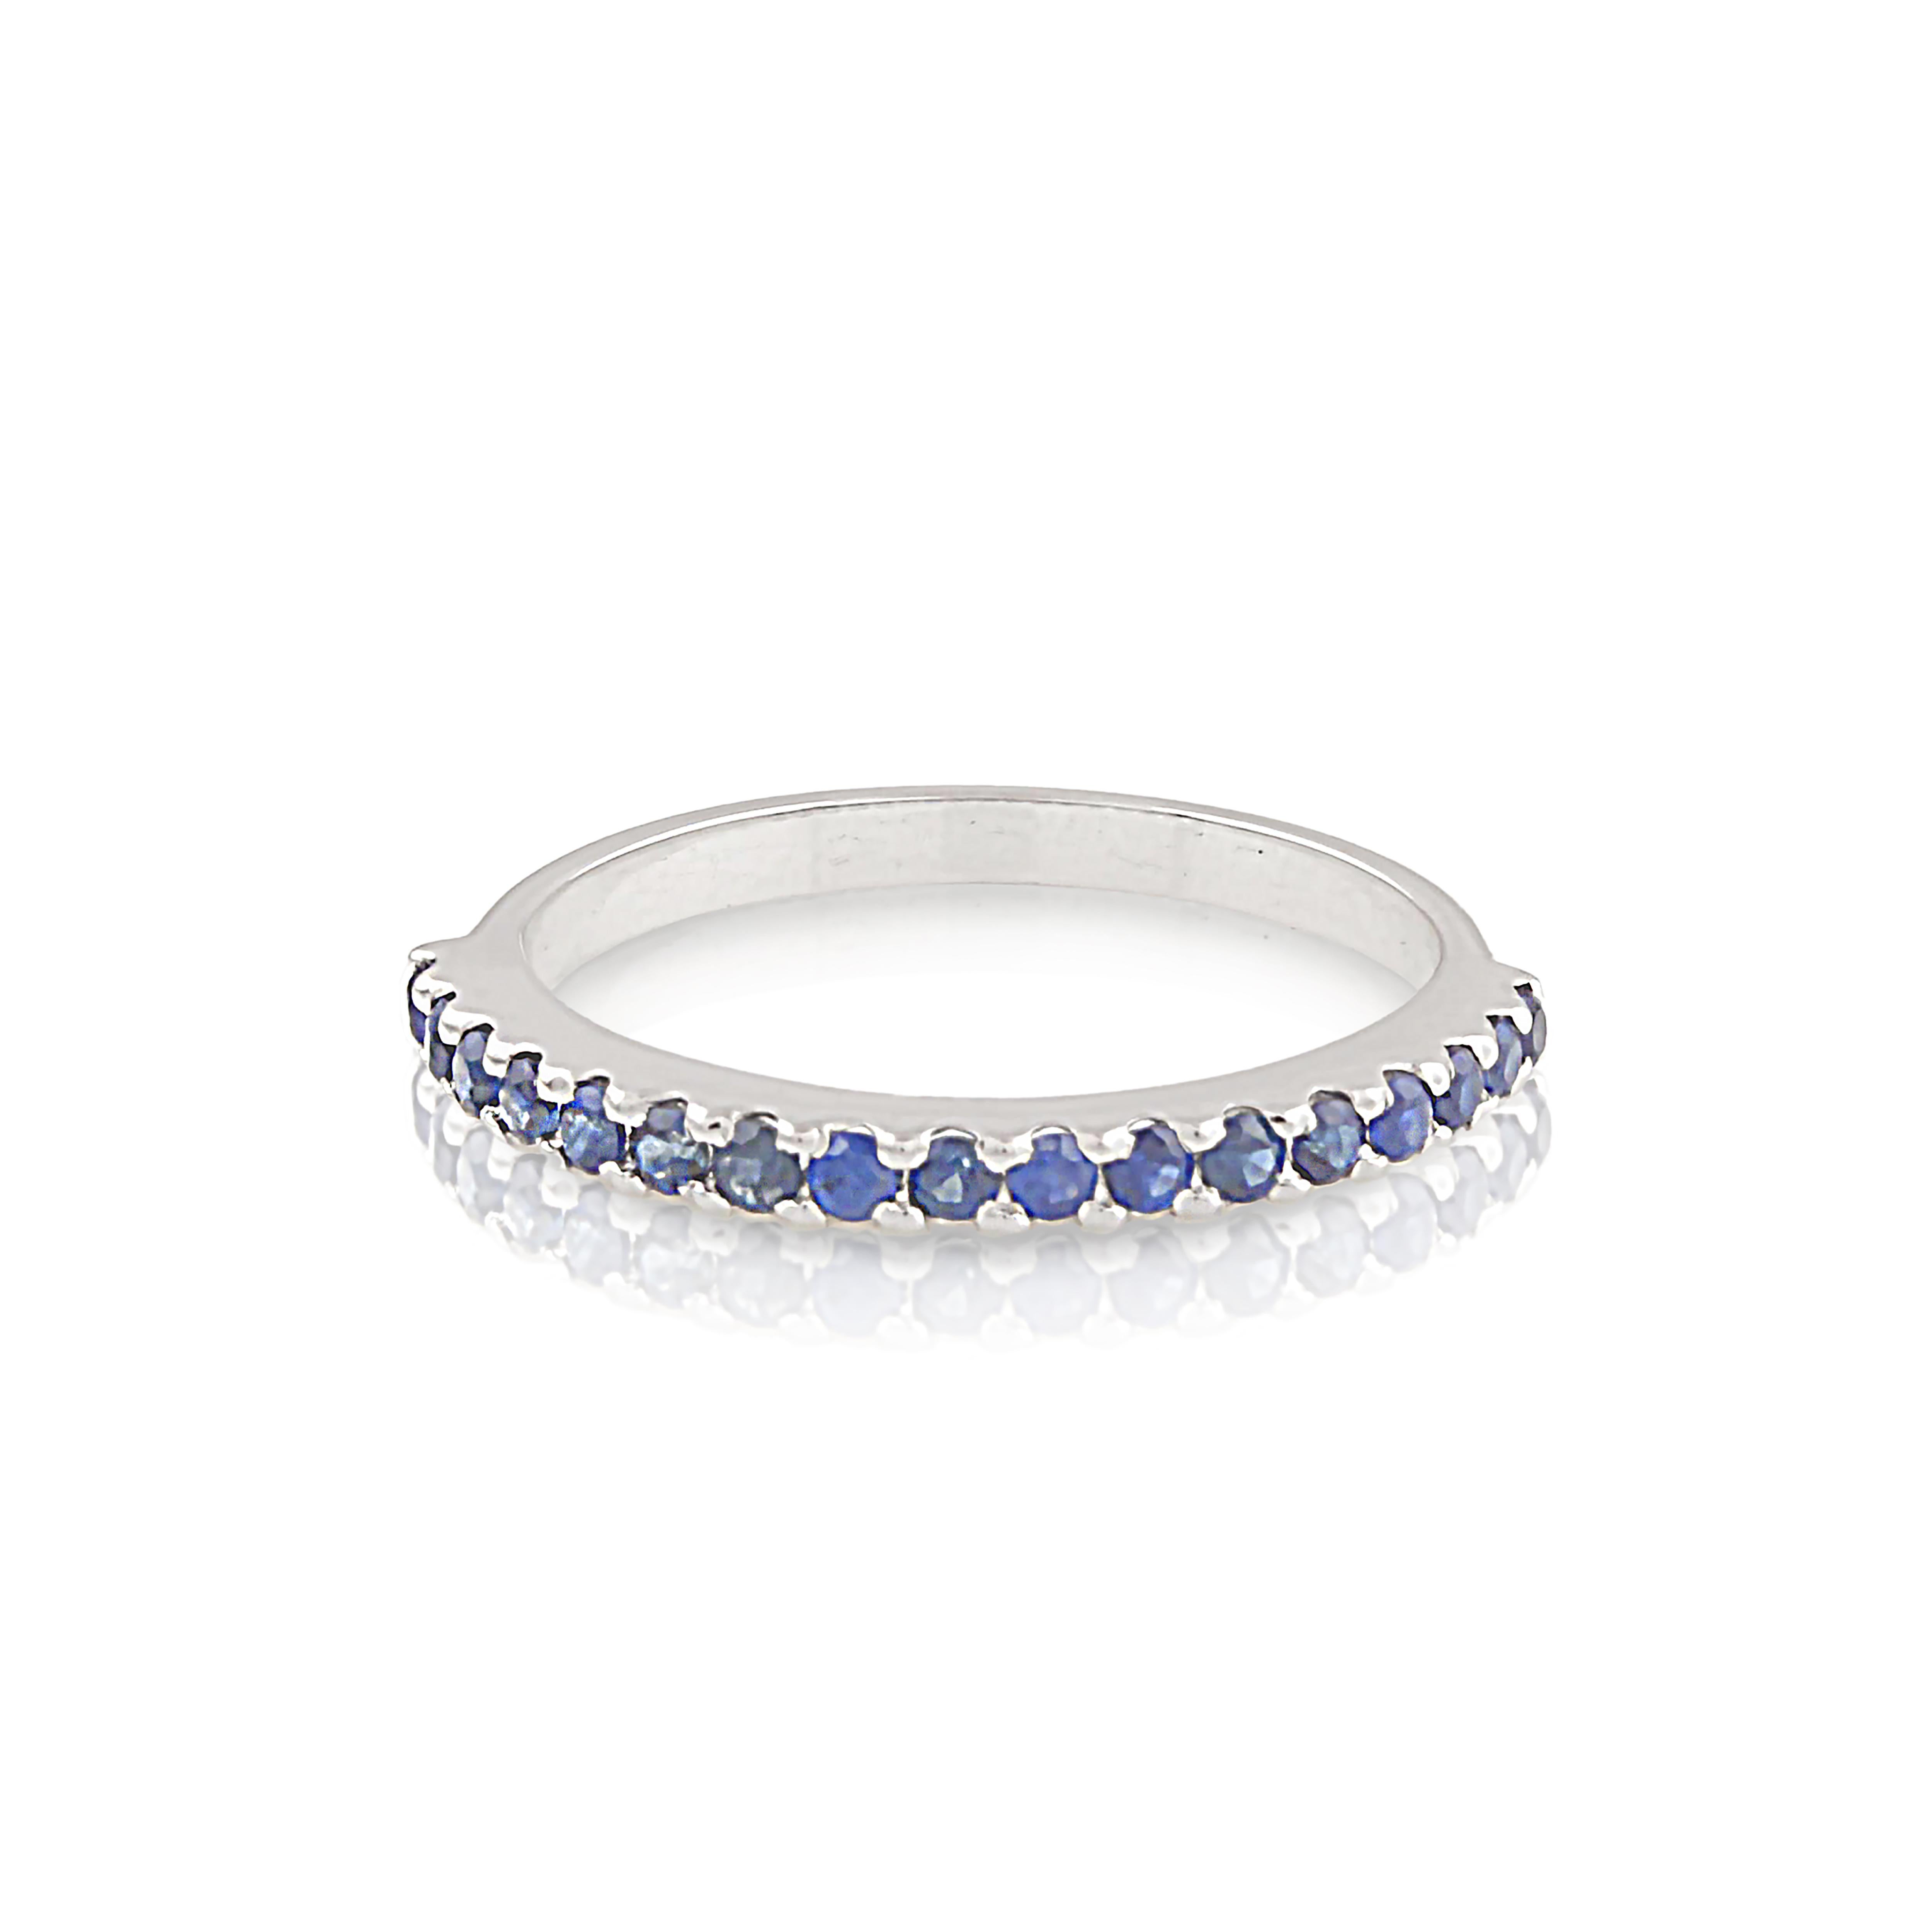 Tresor Beautiful Ring feature 1.18 carats of Blue sapphire. The Ring are an ode to the luxurious yet classic beauty with sparkly gemstones and feminine hues. Their contemporary and modern design make them perfect and versatile to be worn at any